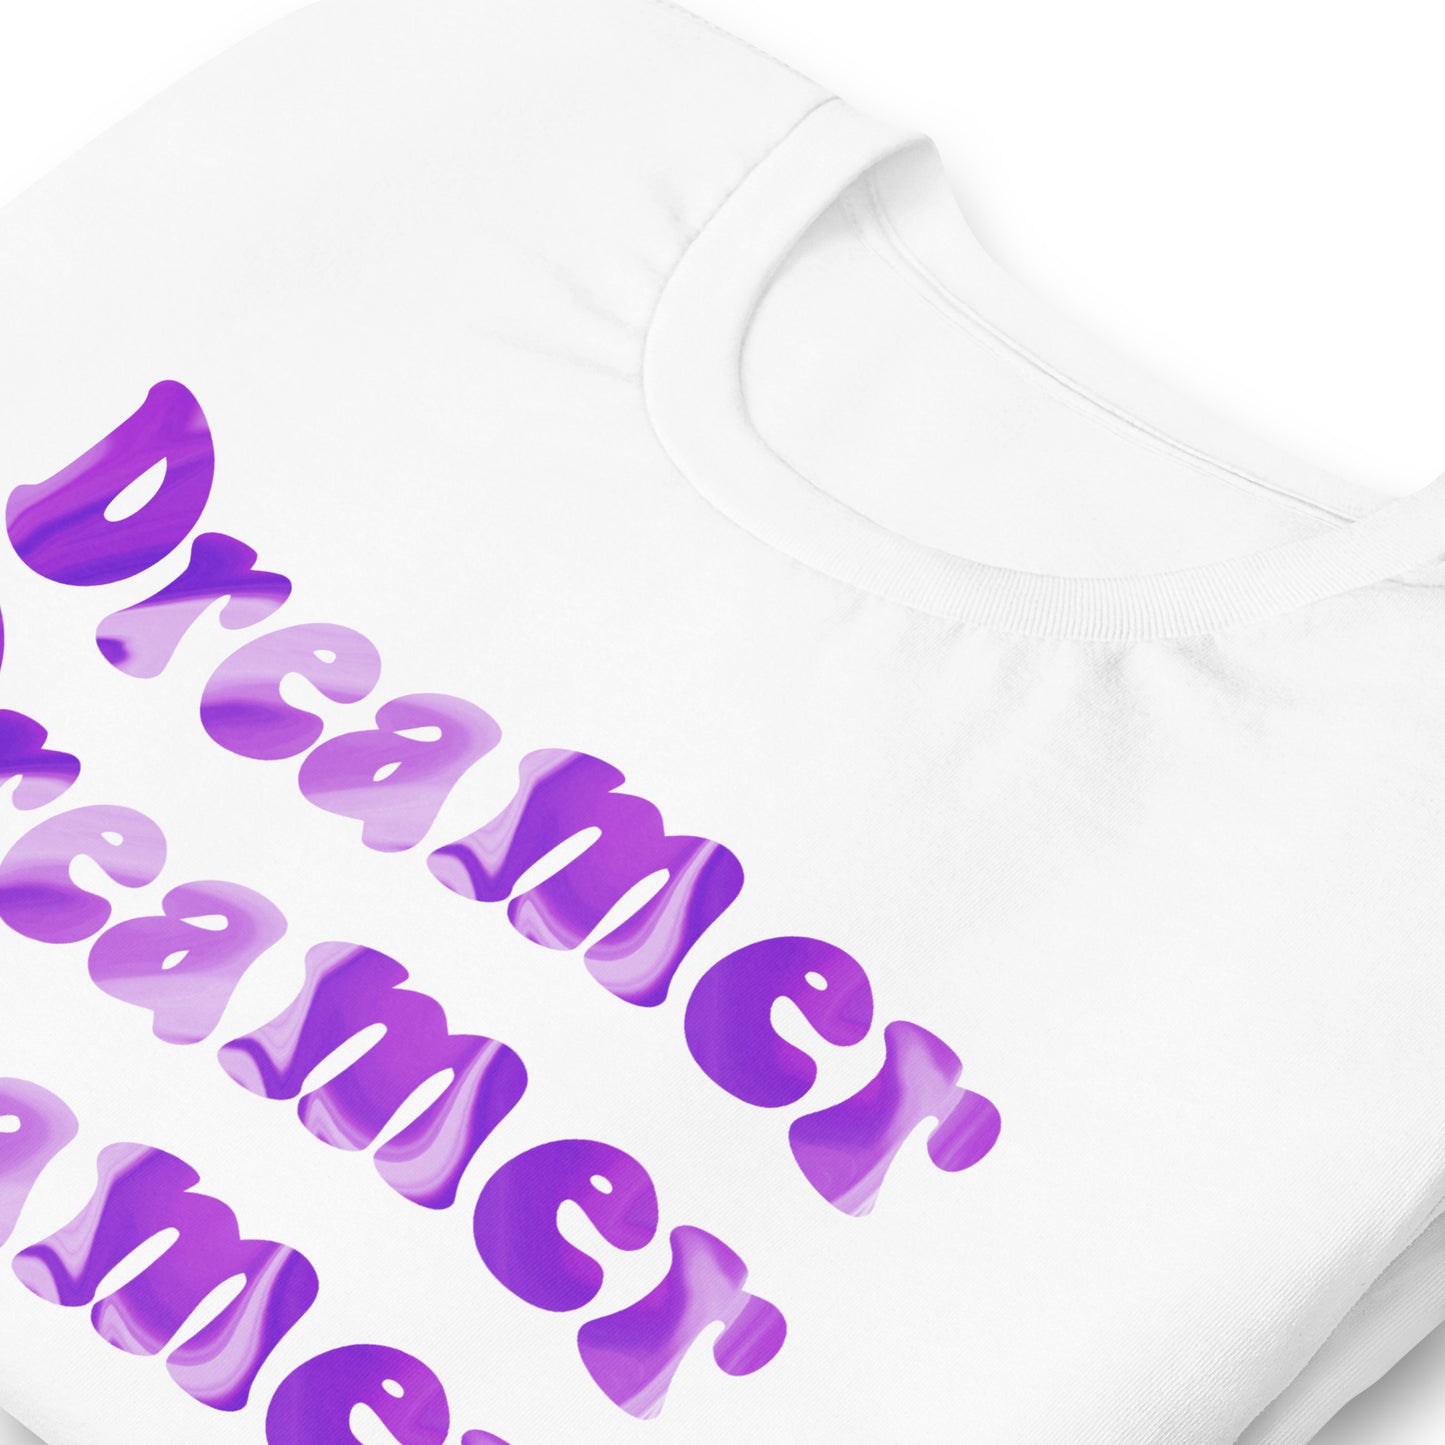 Dreamer t-shirt- 3 year anniversary - multiple color options